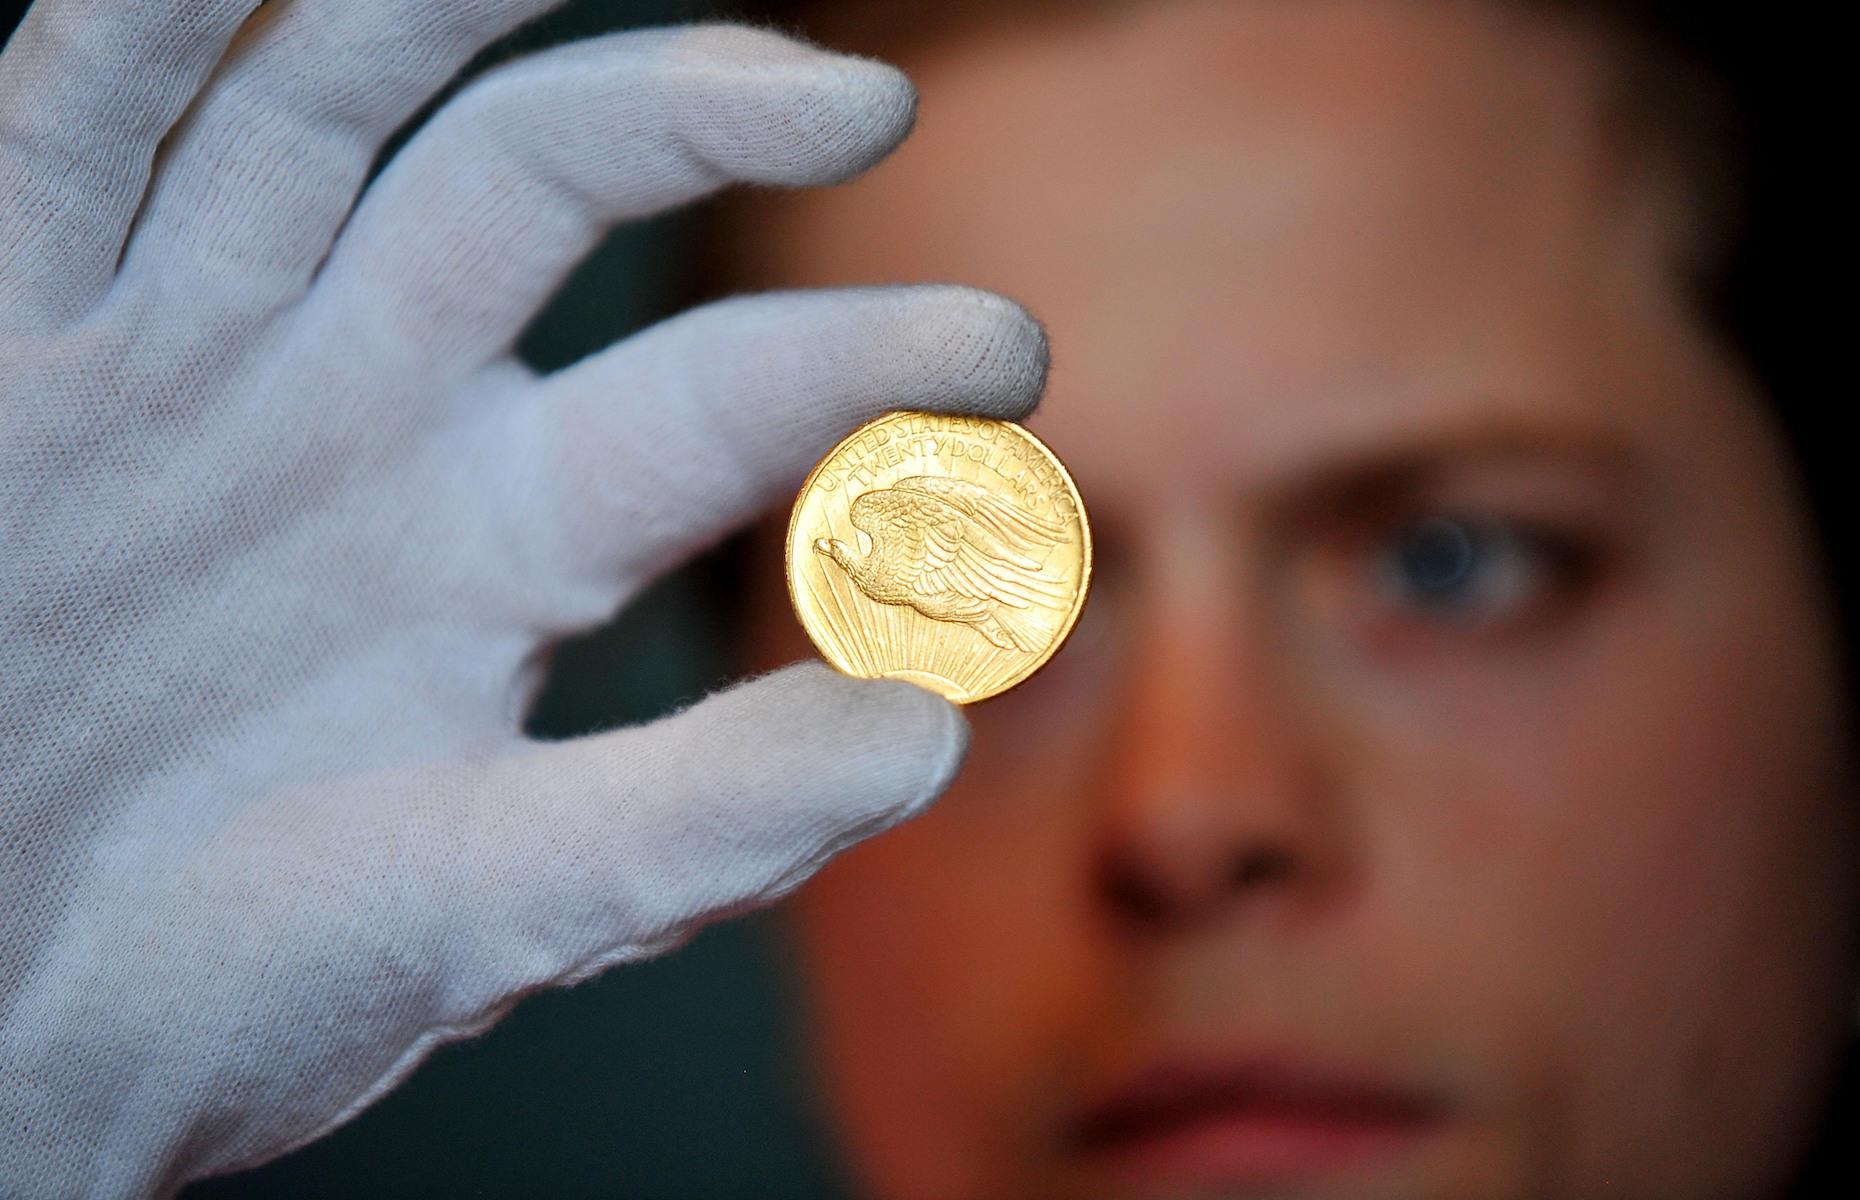 US gold coins in a London garden, UK: $154,000 (£98.2k)